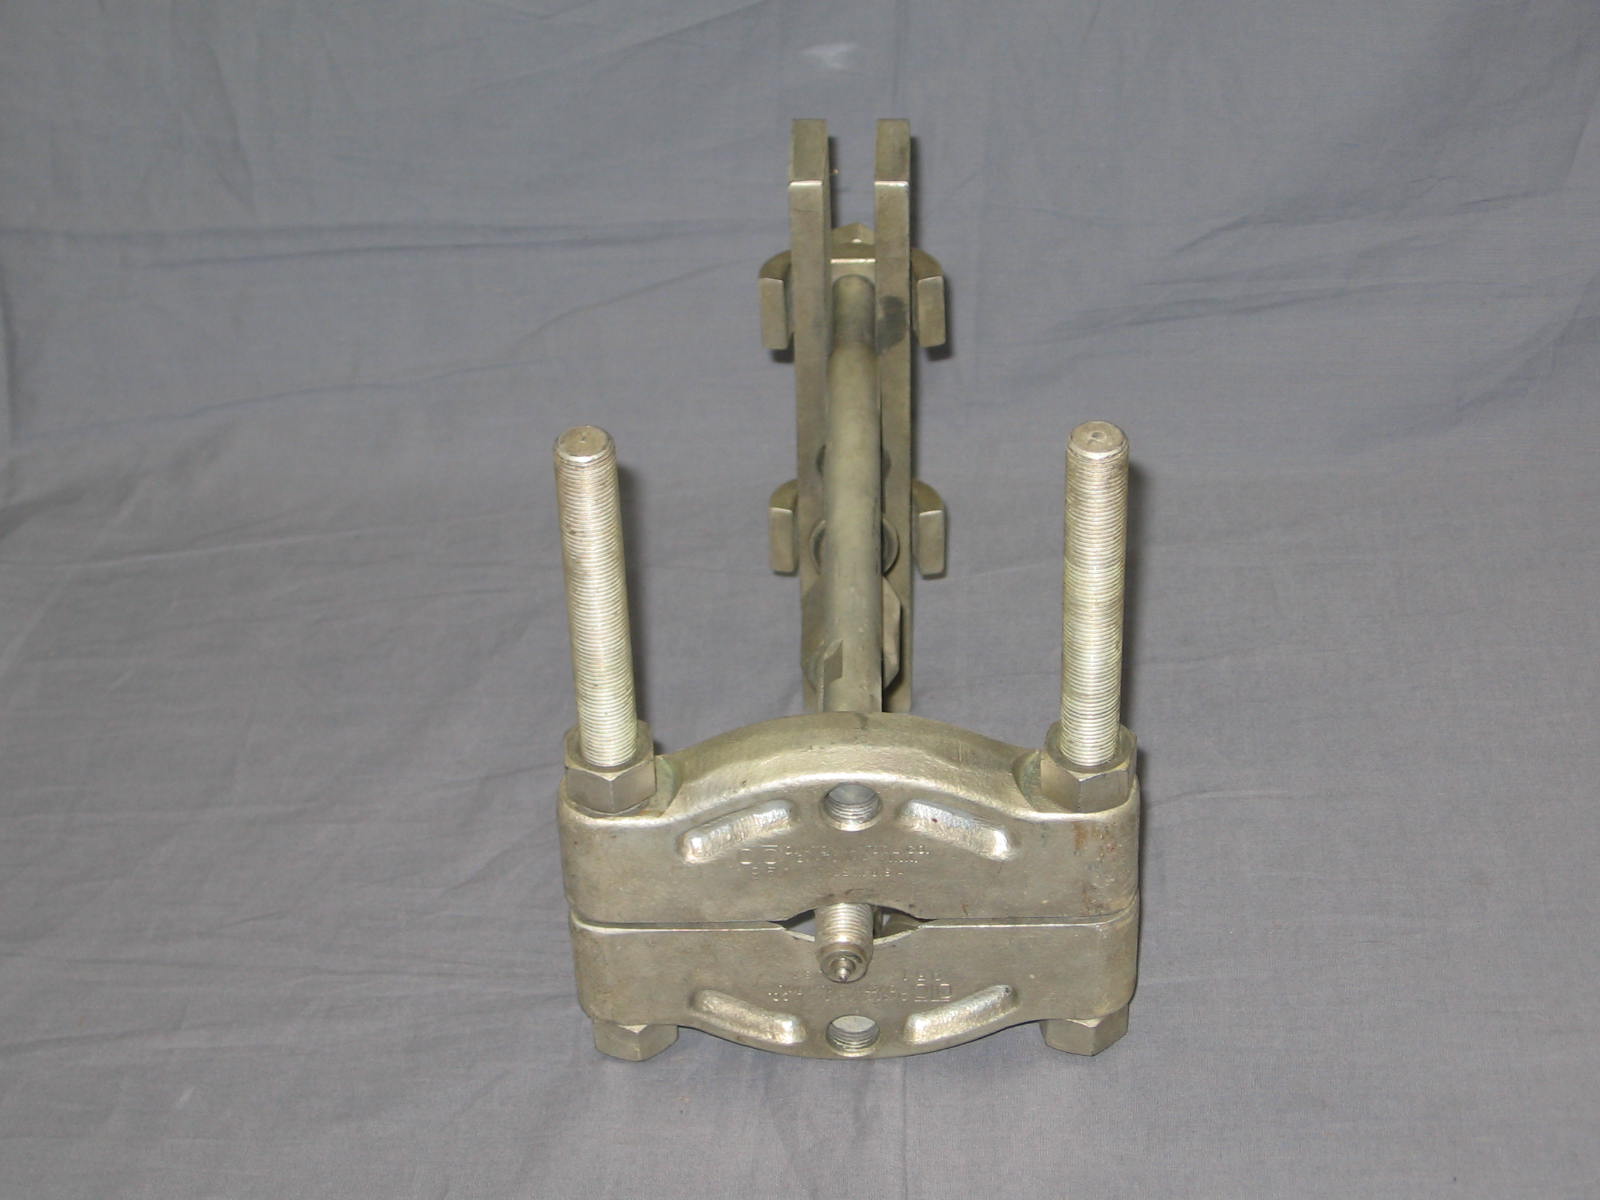 Owatonna Tool Co Universal Bearing Puller W/Attachments 2